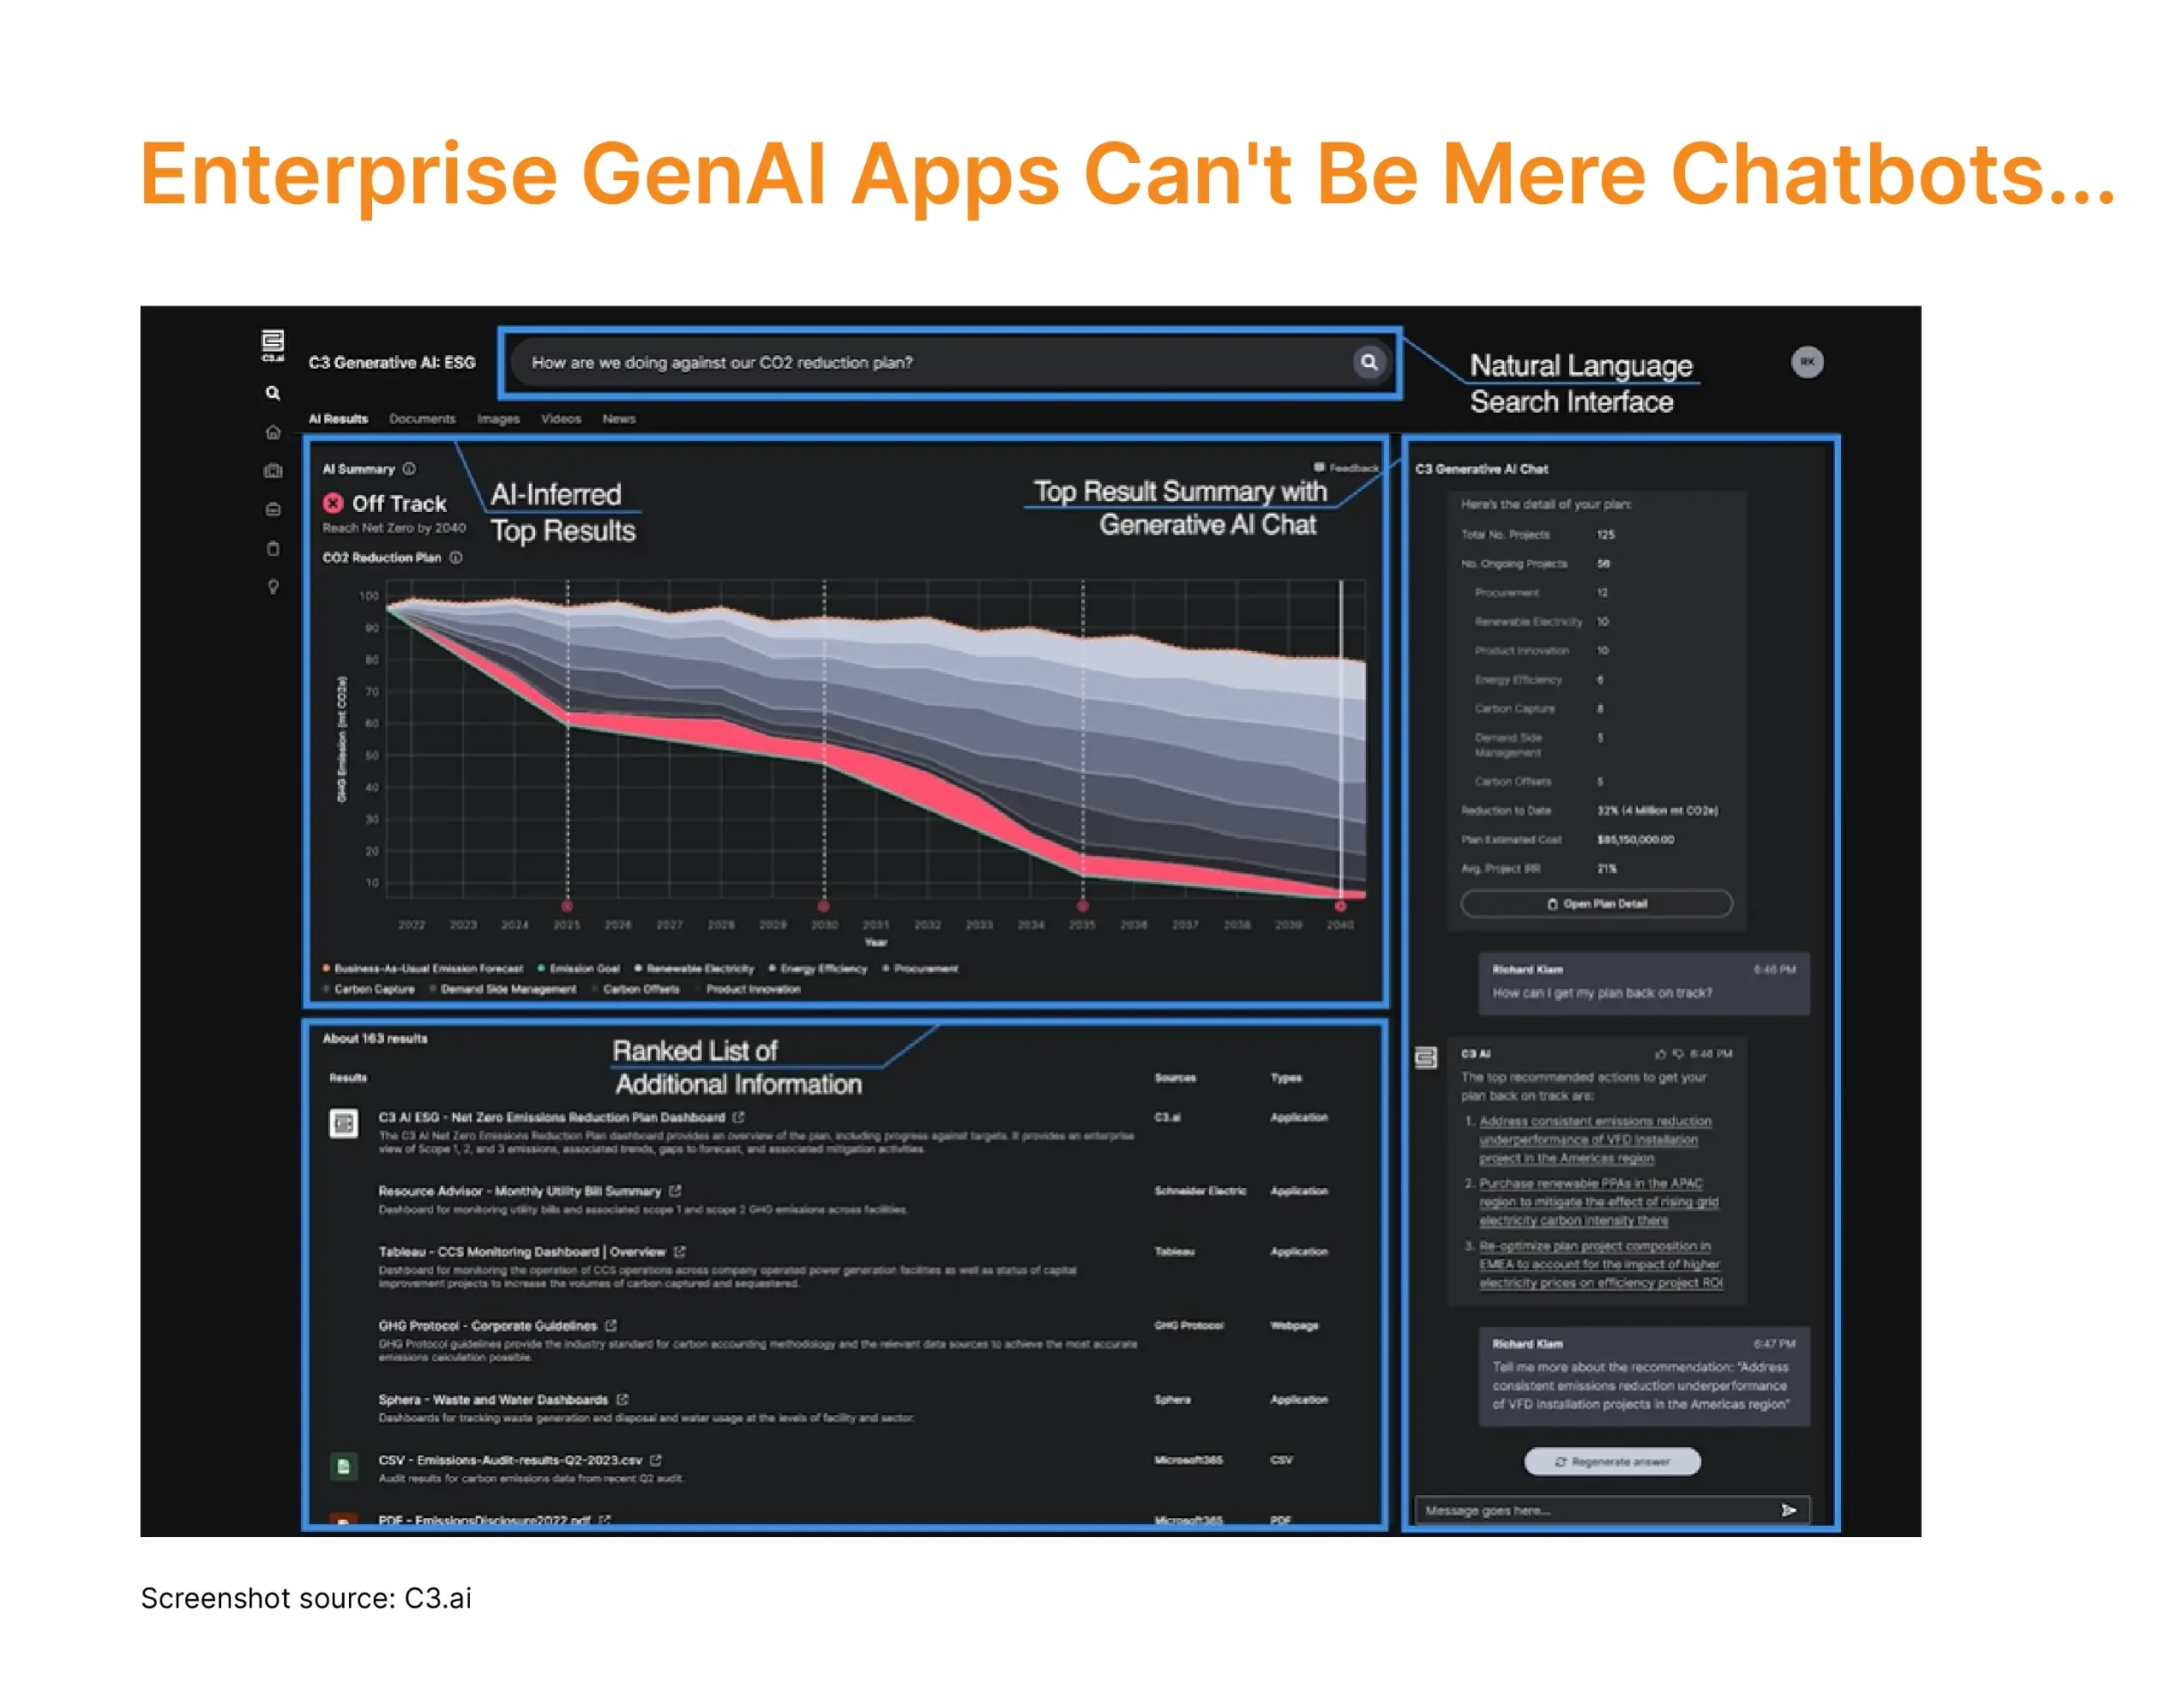 Enterprise GenAl Apps Can't Be Mere Chatbots